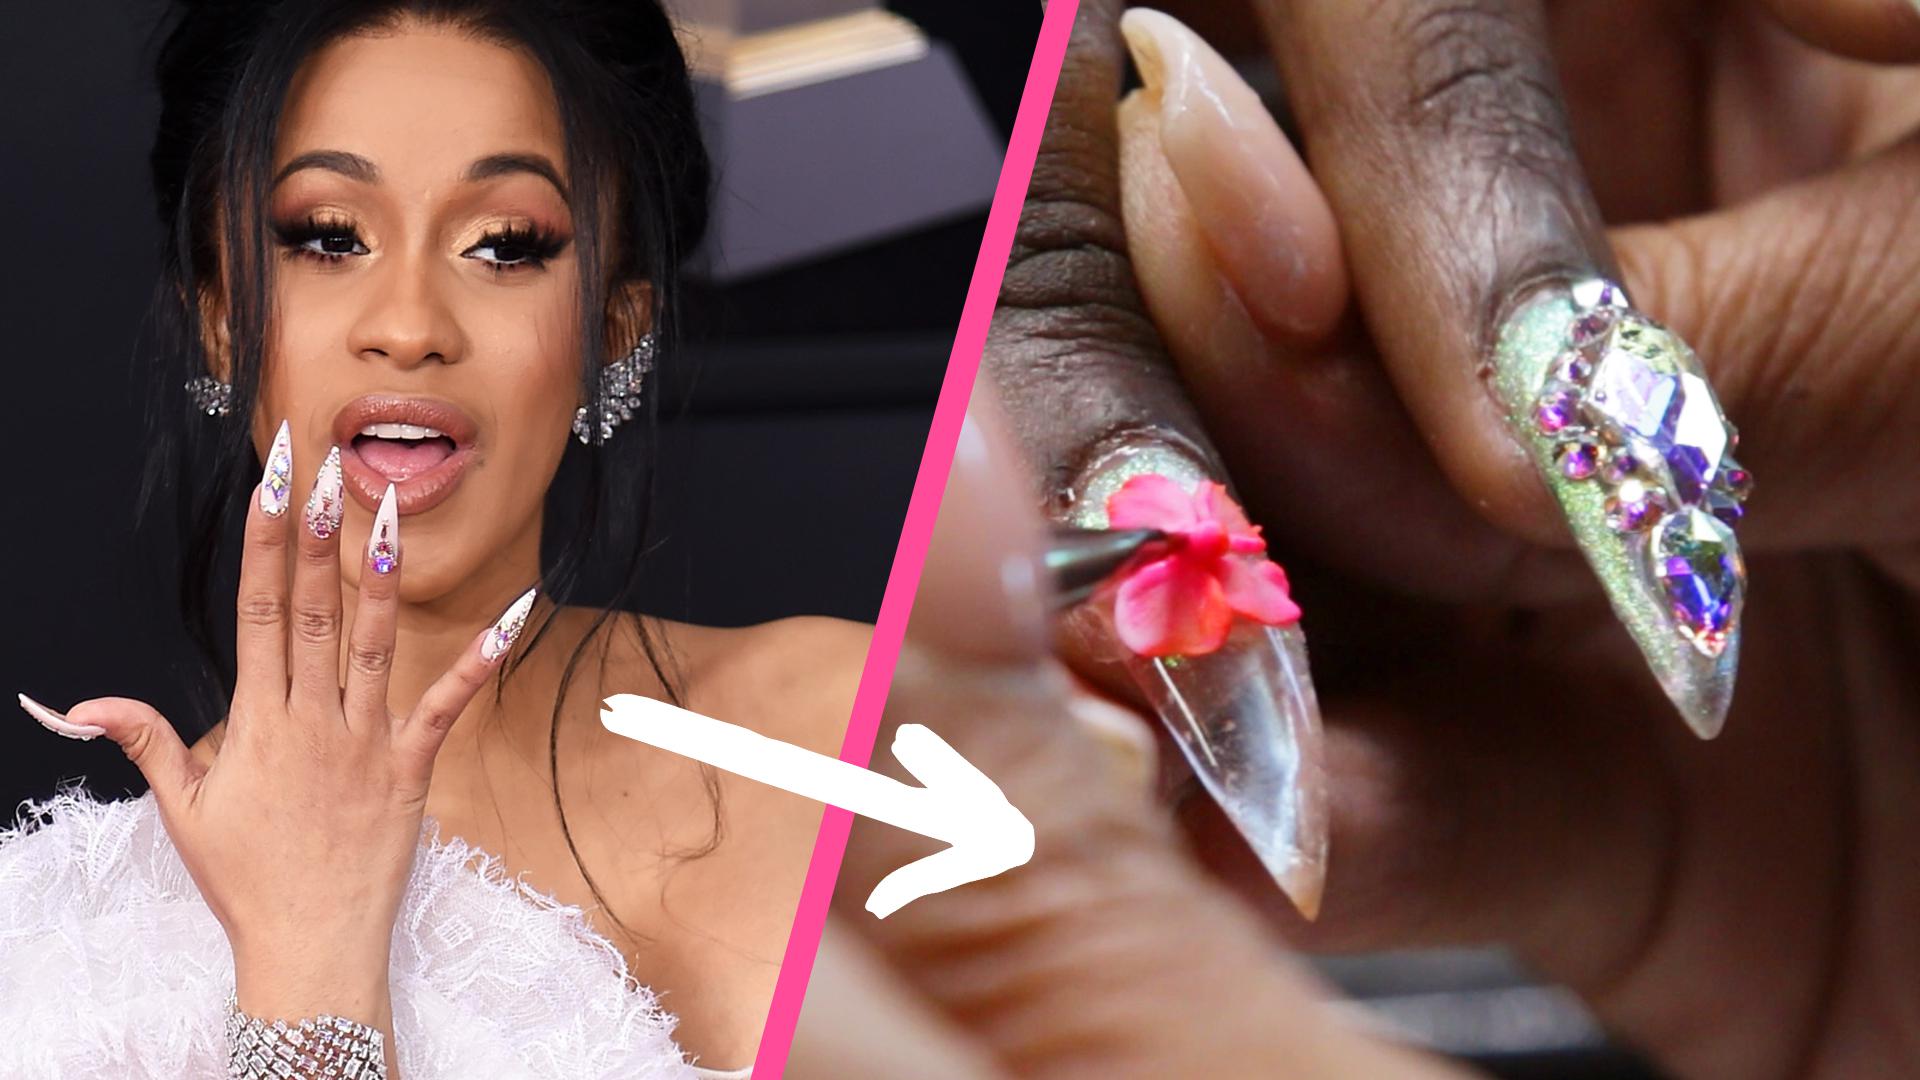 Watch: Cardi B's nails are next level | Metro Video